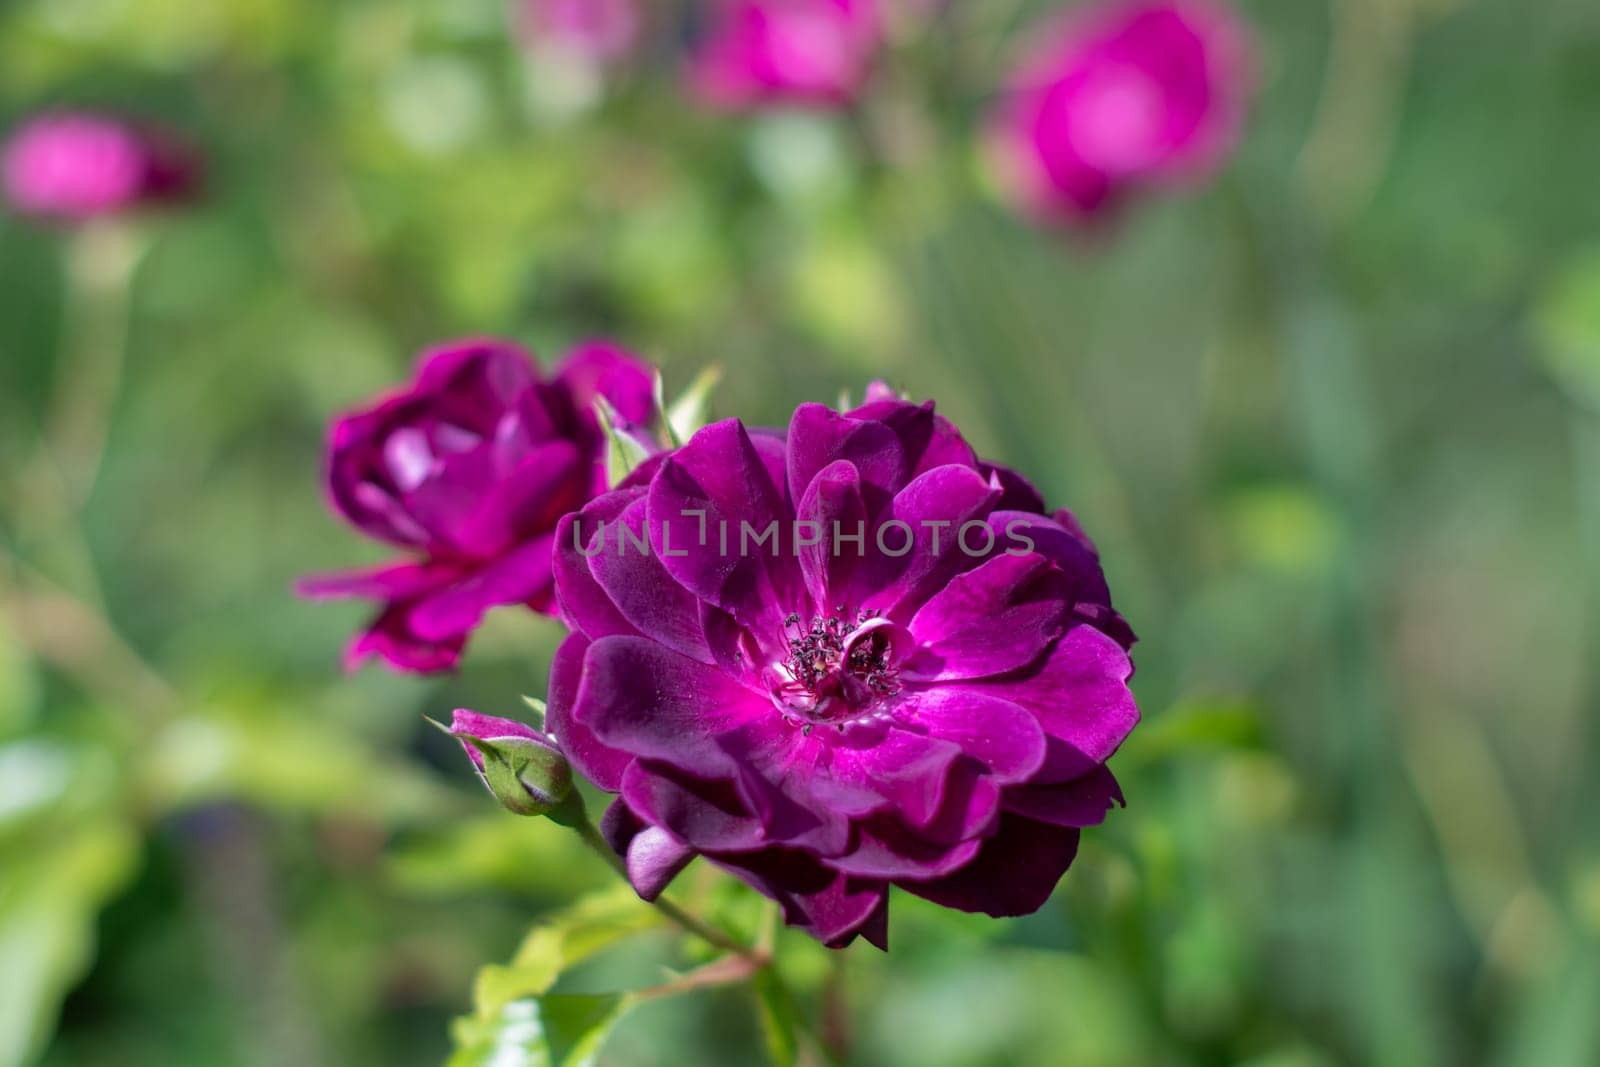 Purple violet mixed color Floribunda Rose Burgundy Ice flowers in the garden, against blurred green leaves, idea for cards, greetings, nature flower background, High quality photo